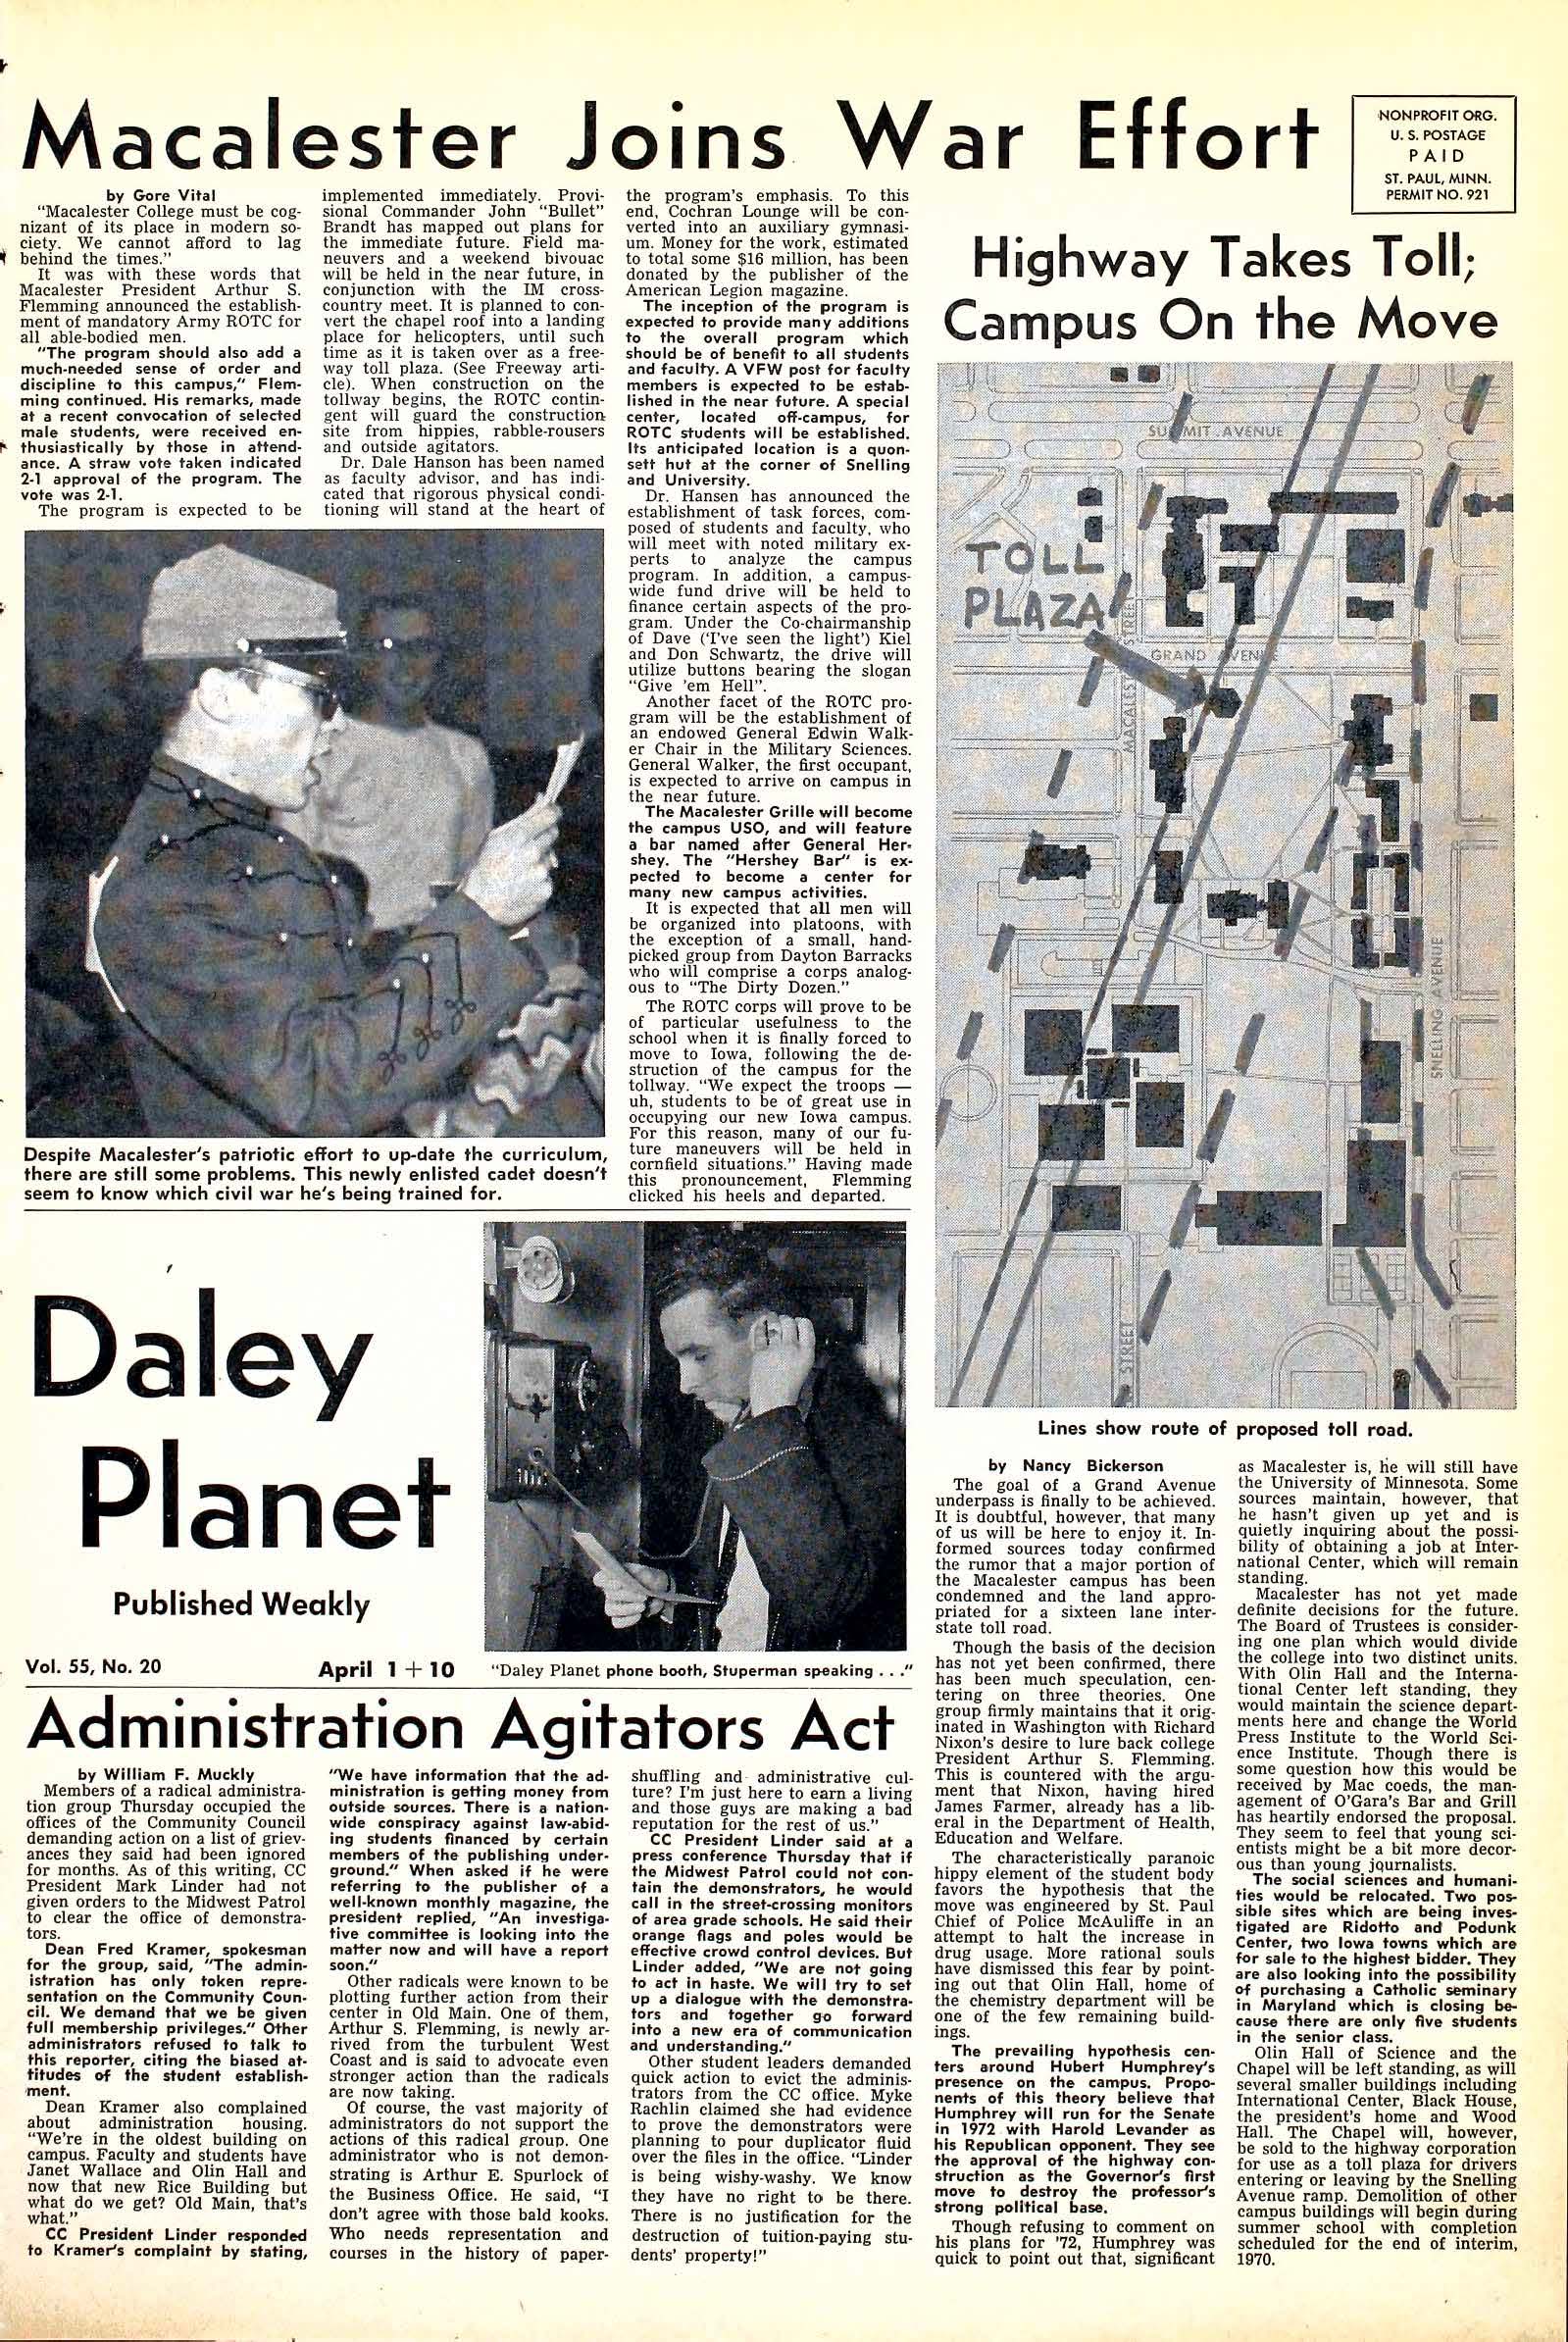 The Mac Weekly, April 11, 1969. Daley Planet Edition.